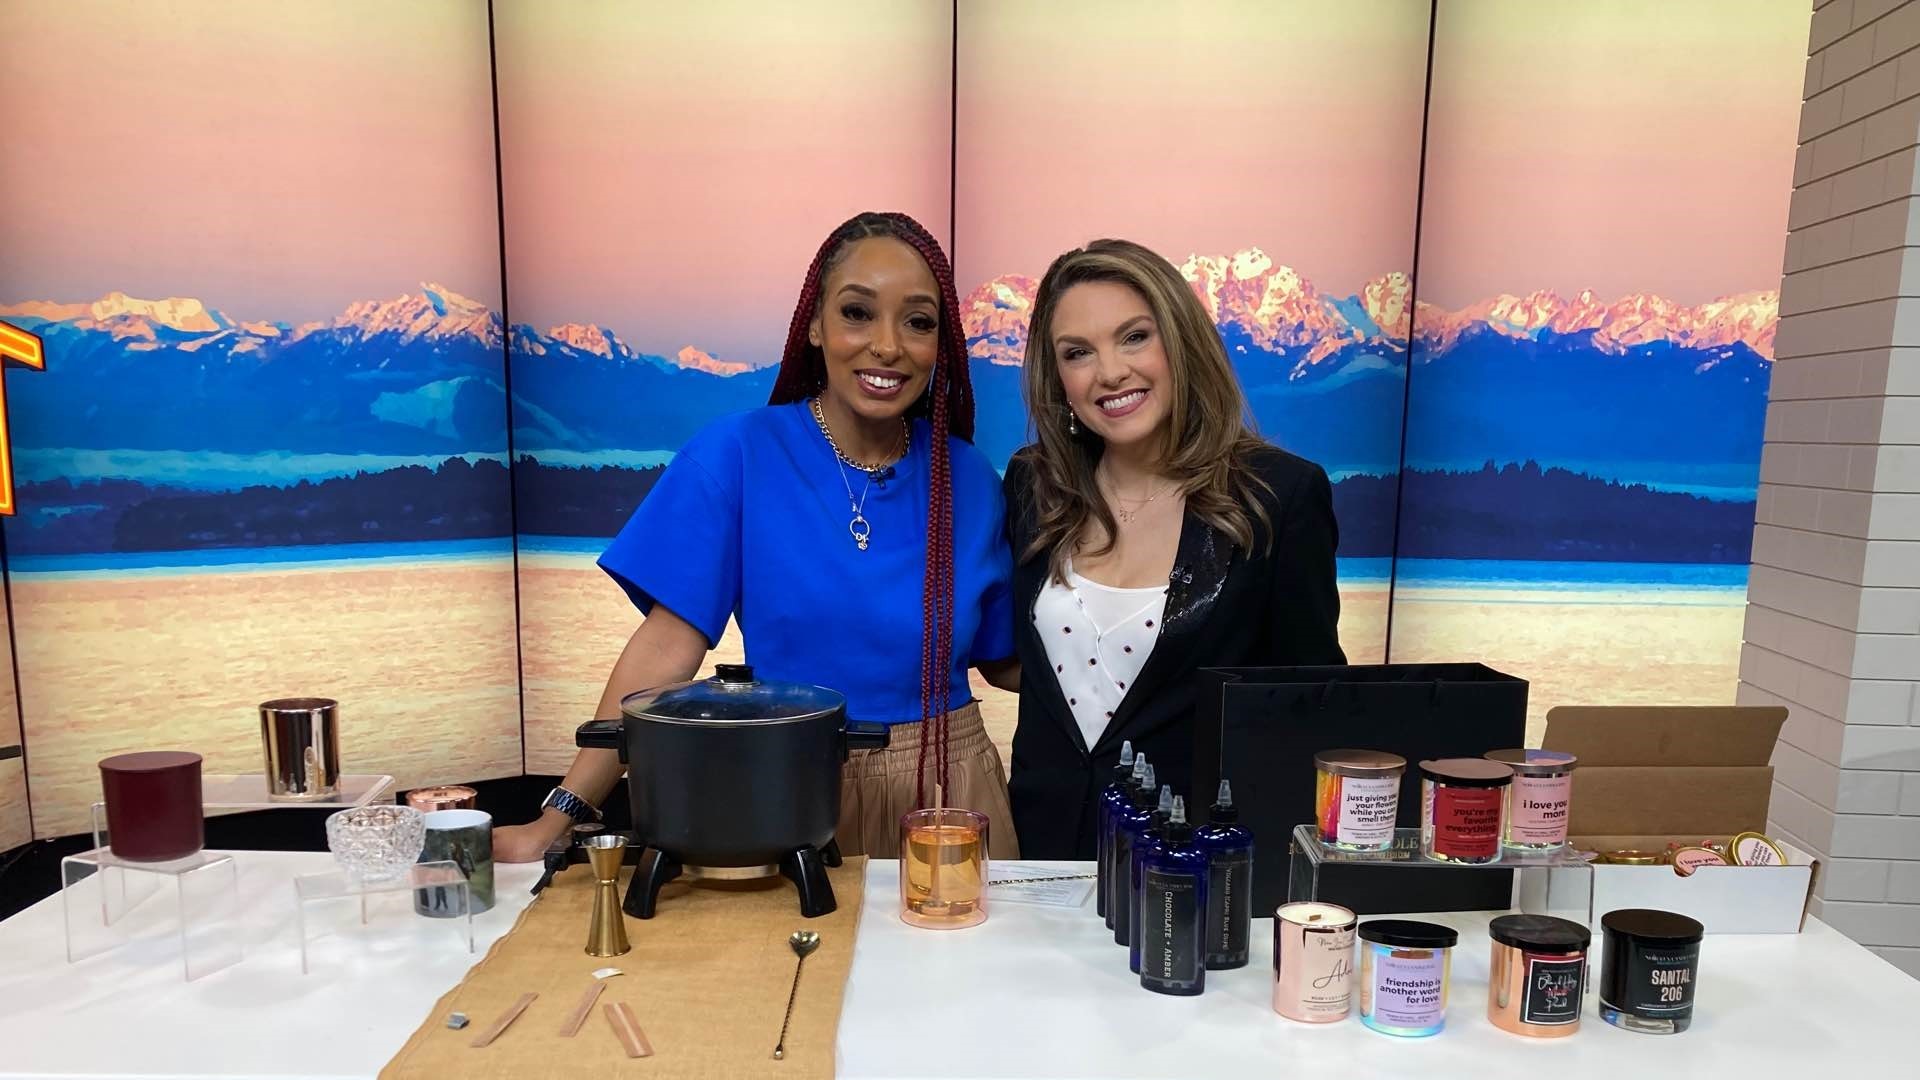 Colina Bruce started making candles out of her kitchen as a hobby during the pandemic. Two years later, she has a brick and mortar store in Belltown. #newdaynw